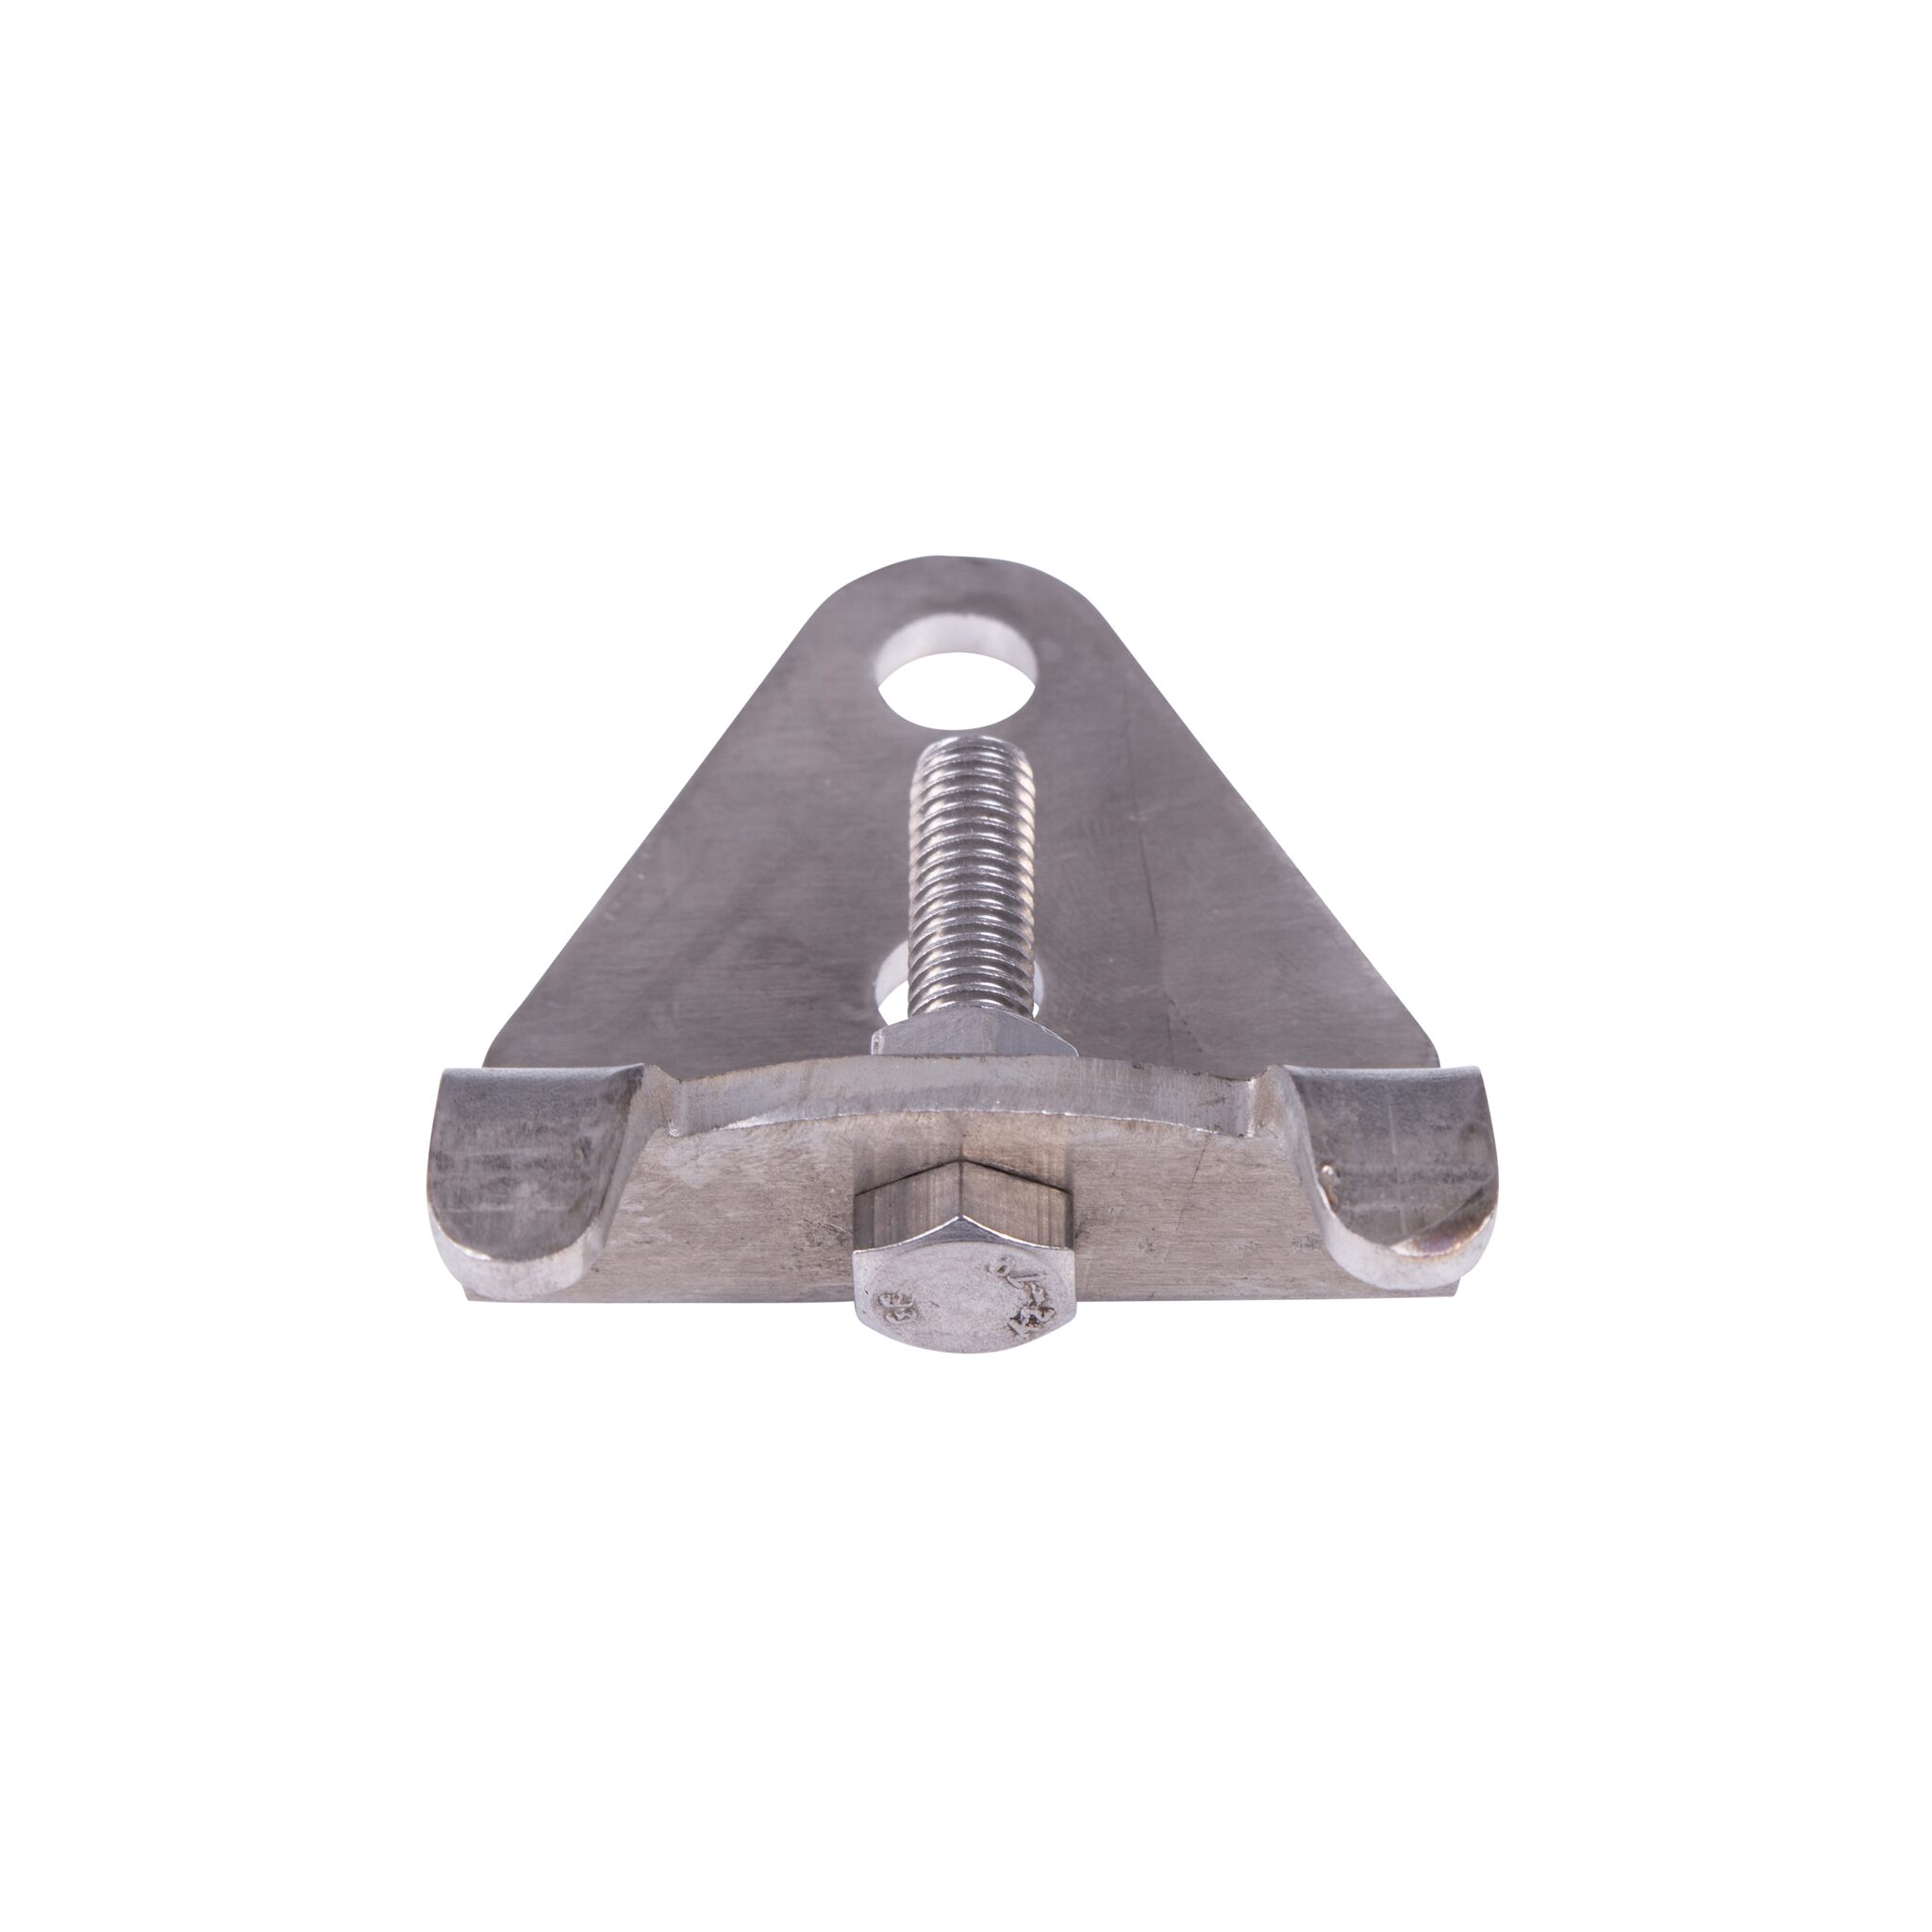 Multiflex mounting plate LM-C-4 for control cable